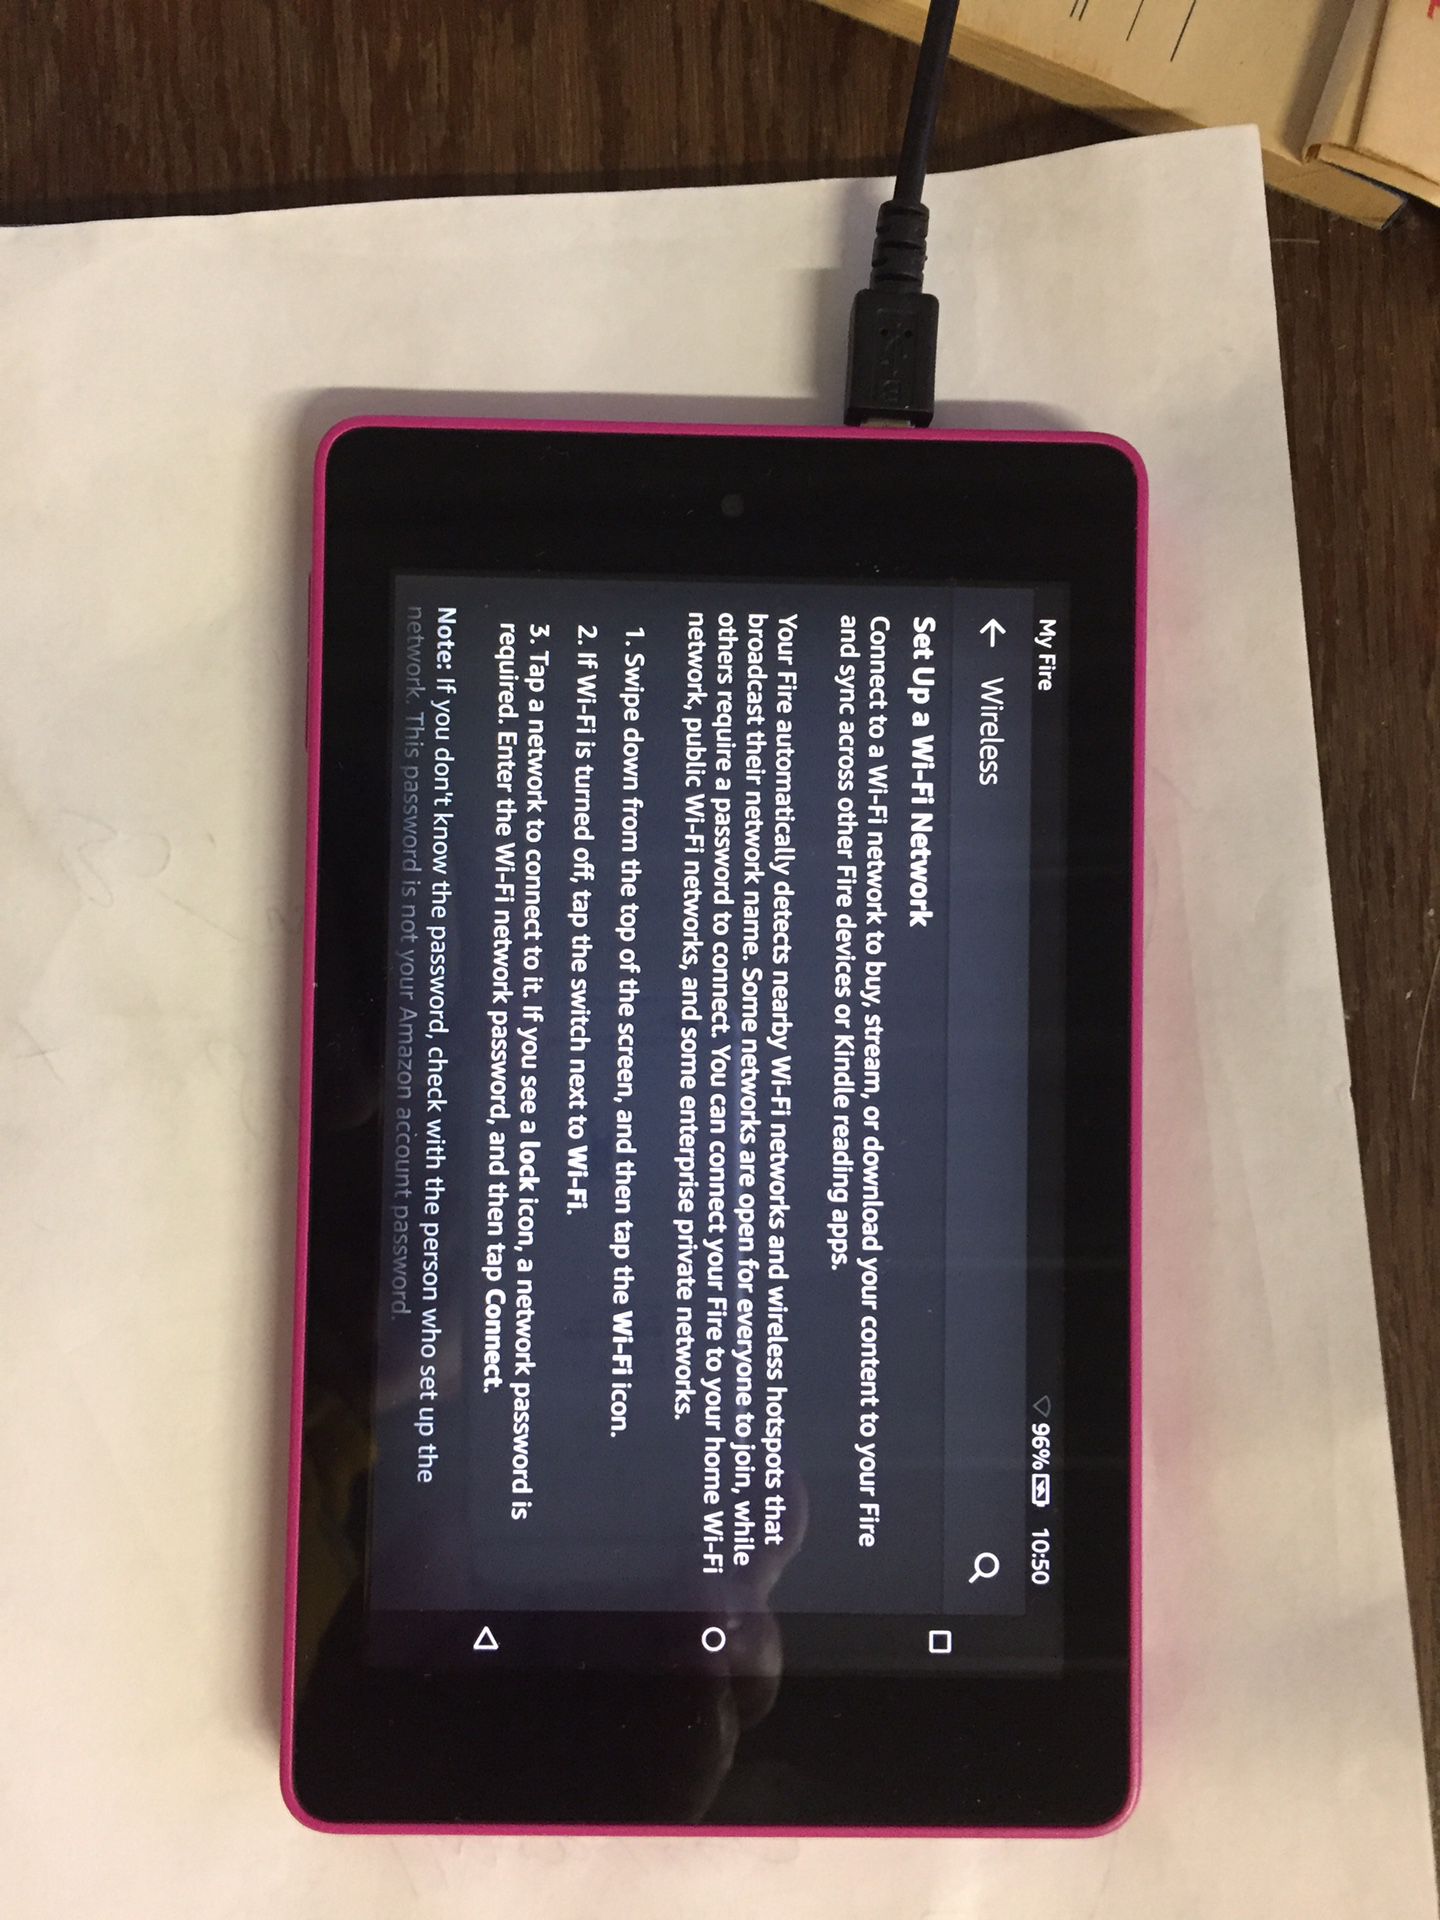 Amazon Kindle Fire HD 6 4th generation pink tablet